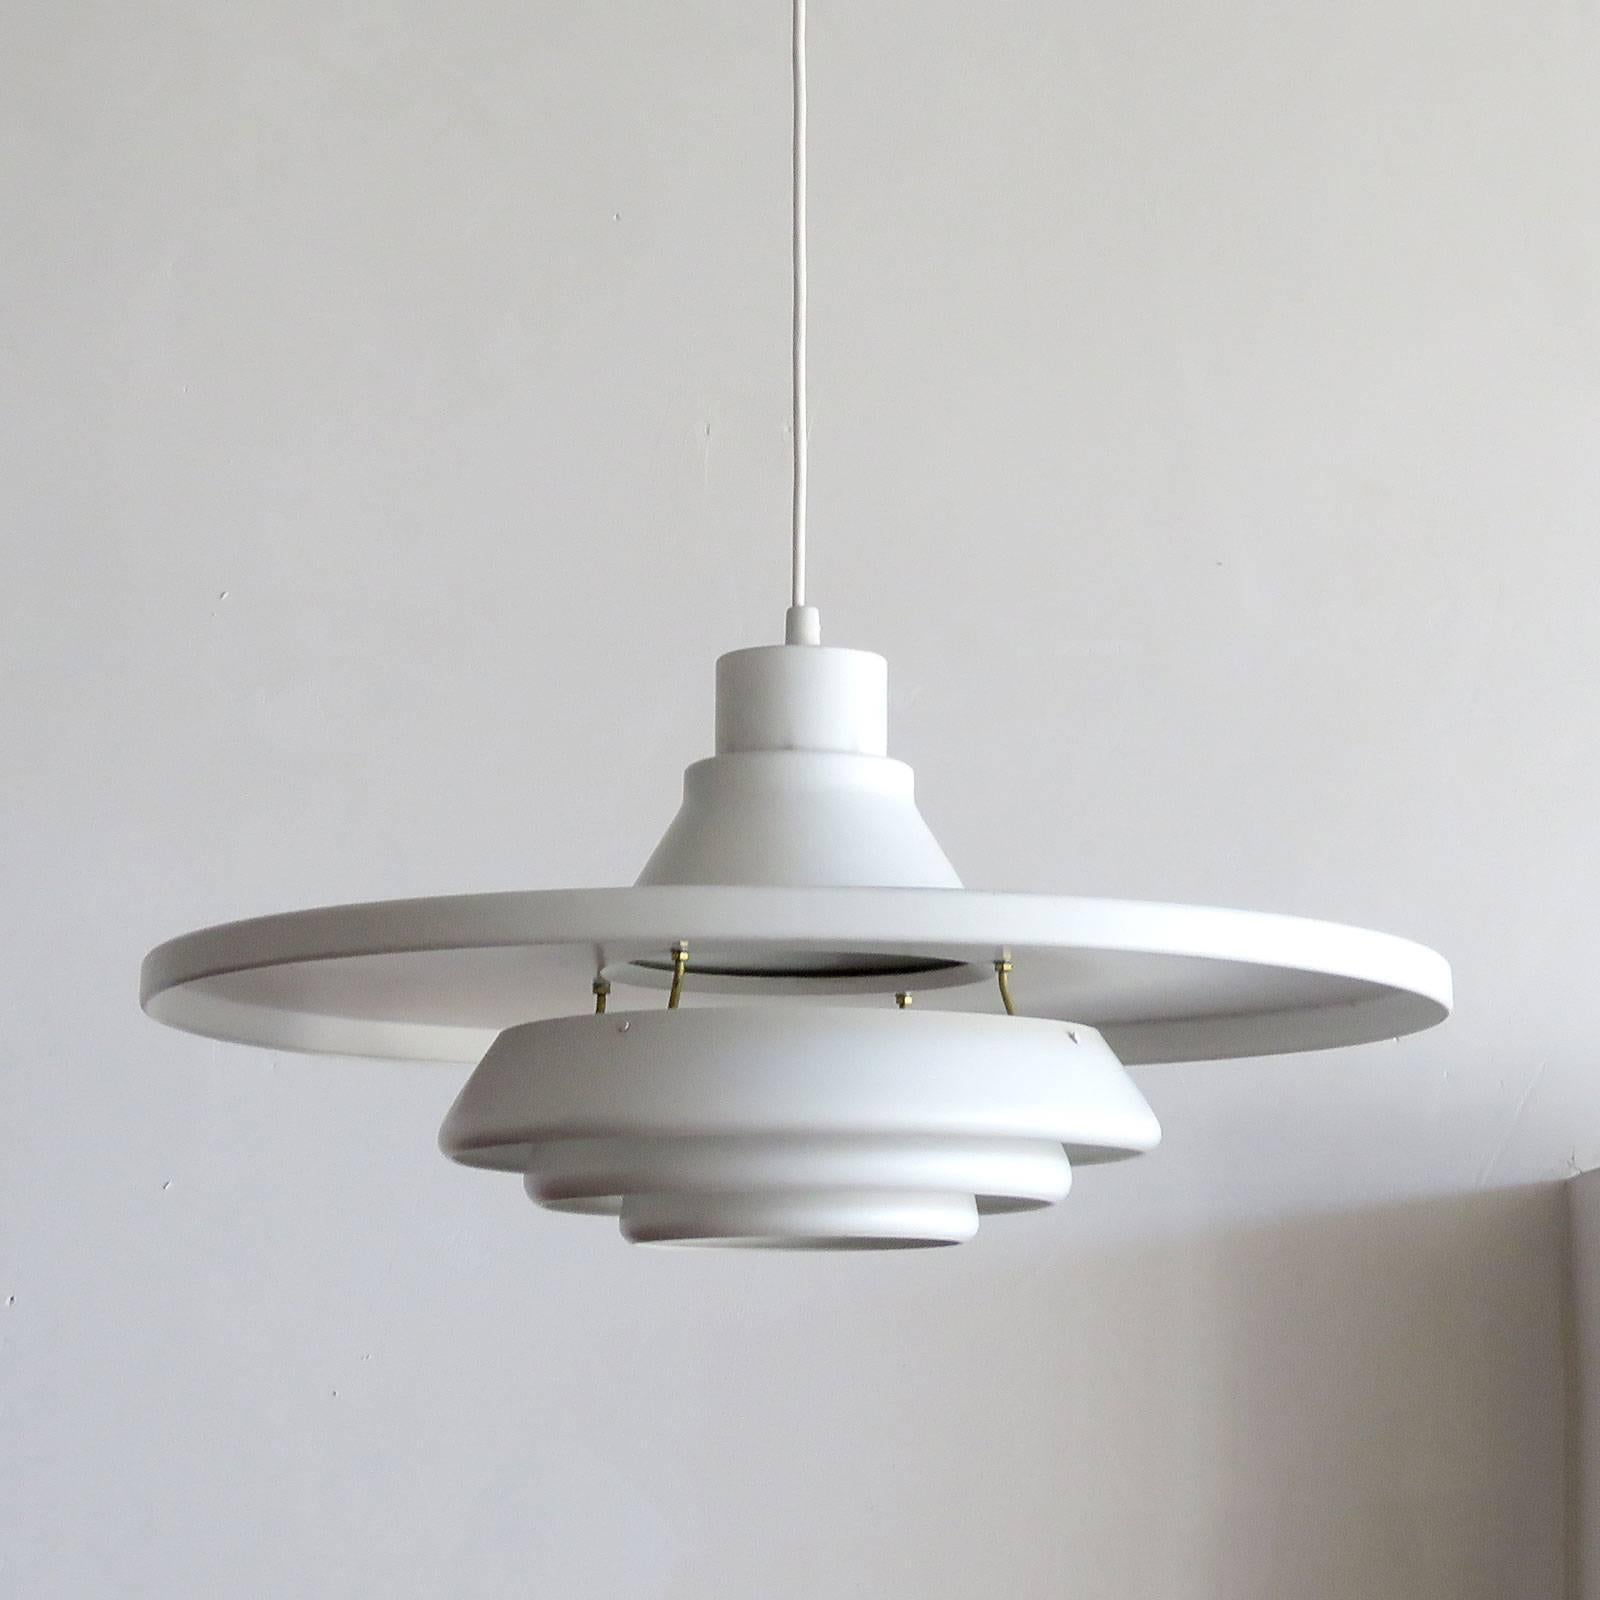 Wonderful 'Flying Saucer' Model A337, ceiling lamp by Alvar Aalto, early example by original manufacture Valaisinpaja Oy, Finland, circa 1953, labelled with manufacture's mark.